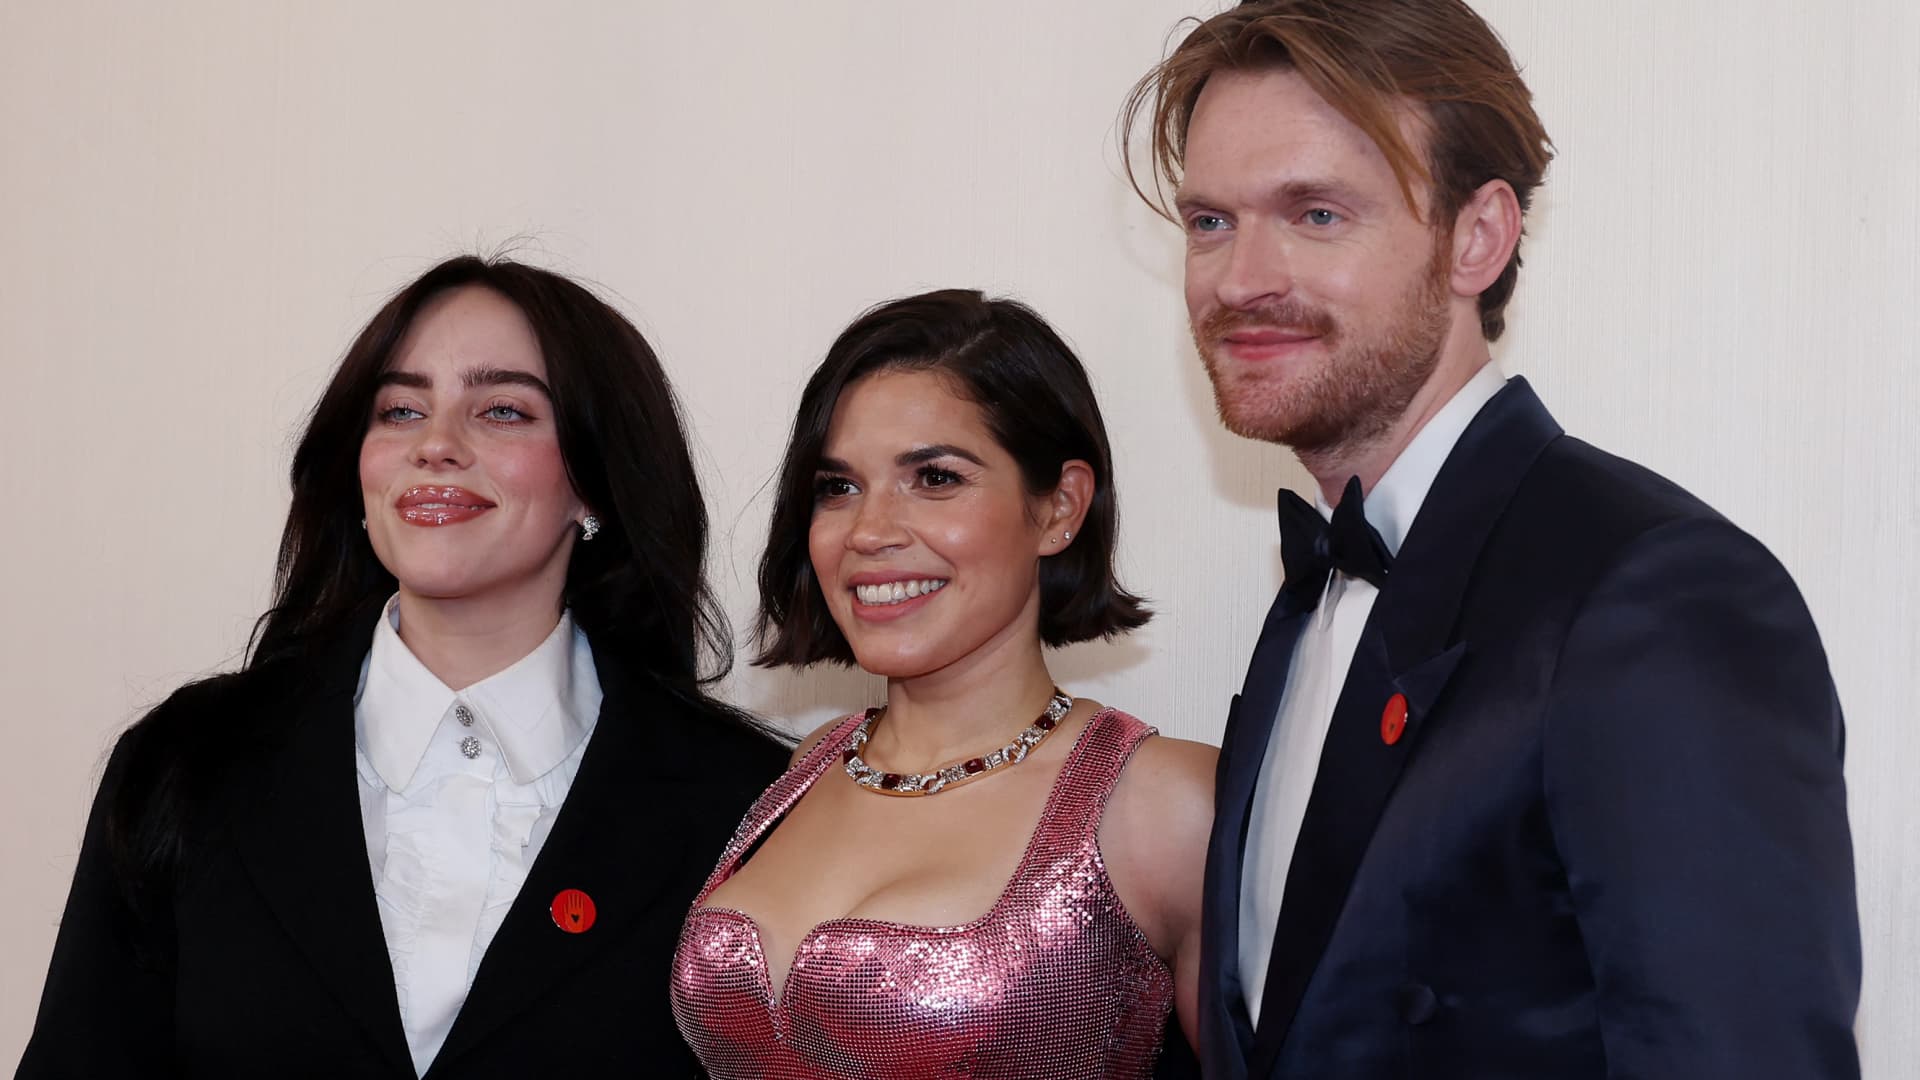 Billie Eilish, America Ferrera and Finneas O'Connell pose on the red carpet during the Oscars arrivals at the 96th Academy Awards in Hollywood, Los Angeles, California, U.S., March 10, 2024.